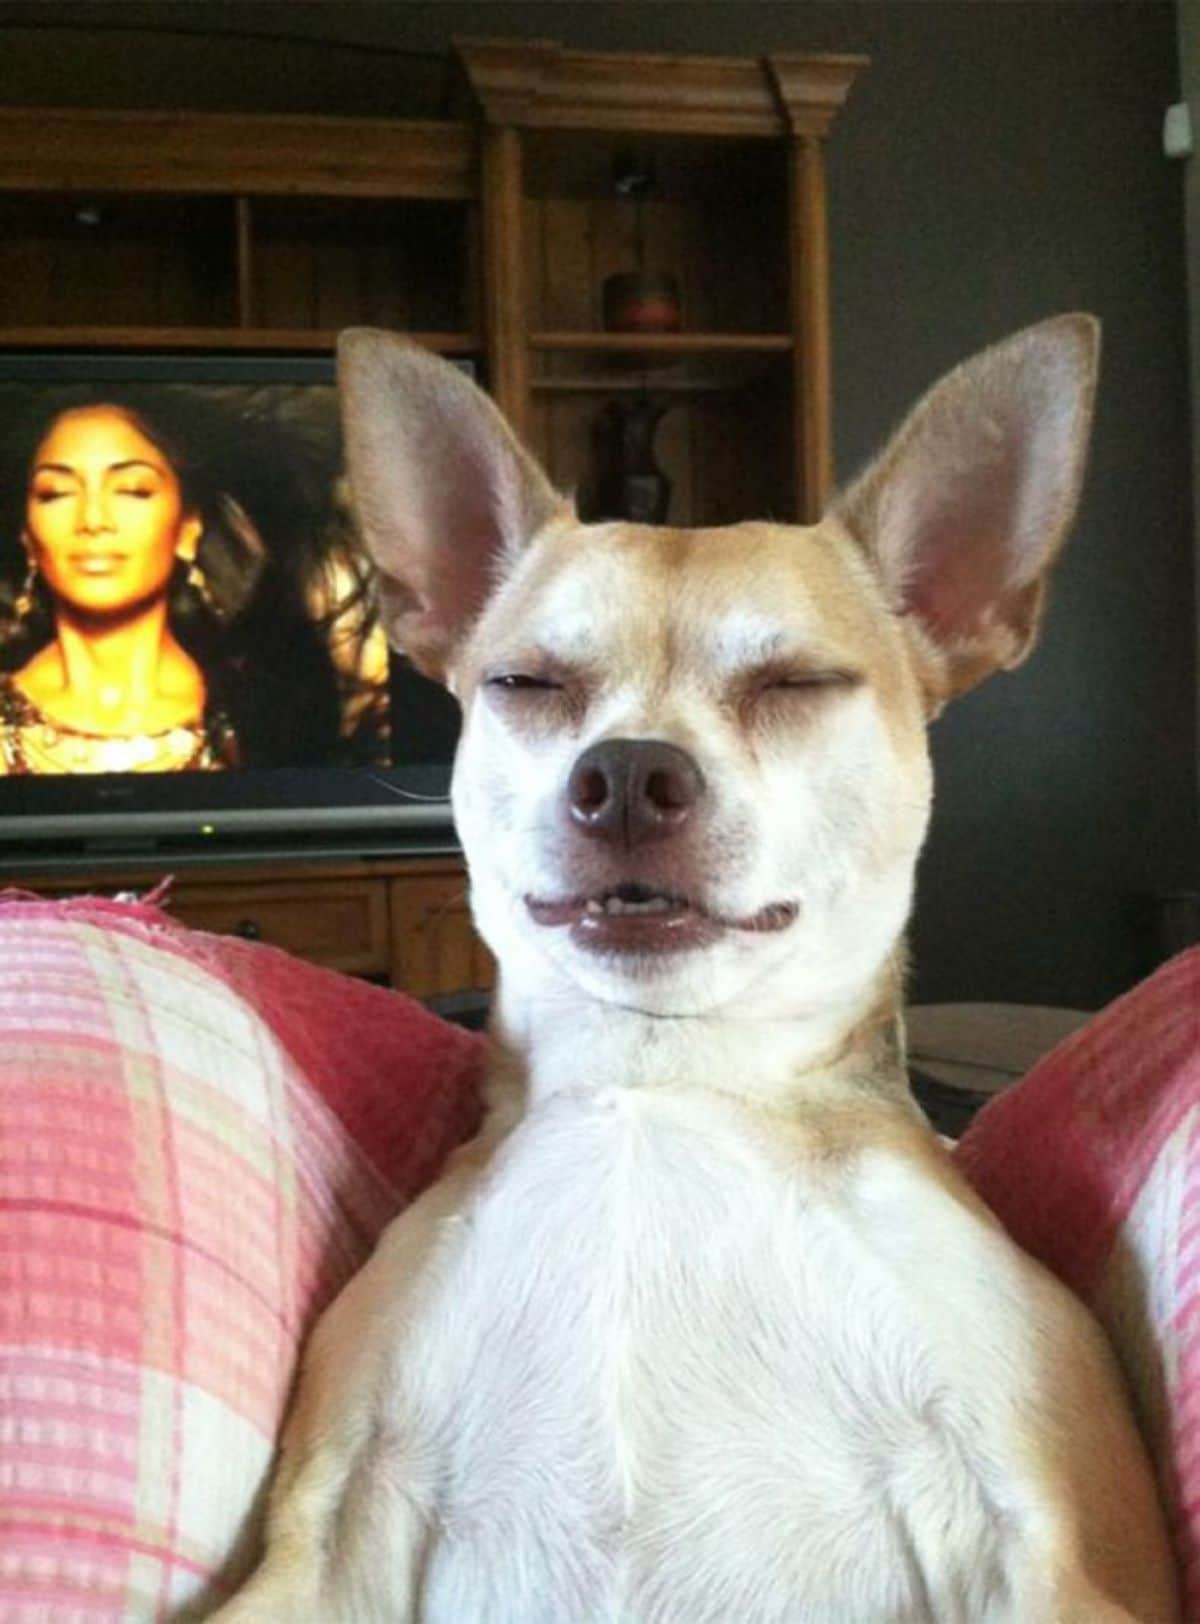 brown and white dog sitting up with eyes closed in front of a television screen with nicole scherzinger smiling with eyes closed